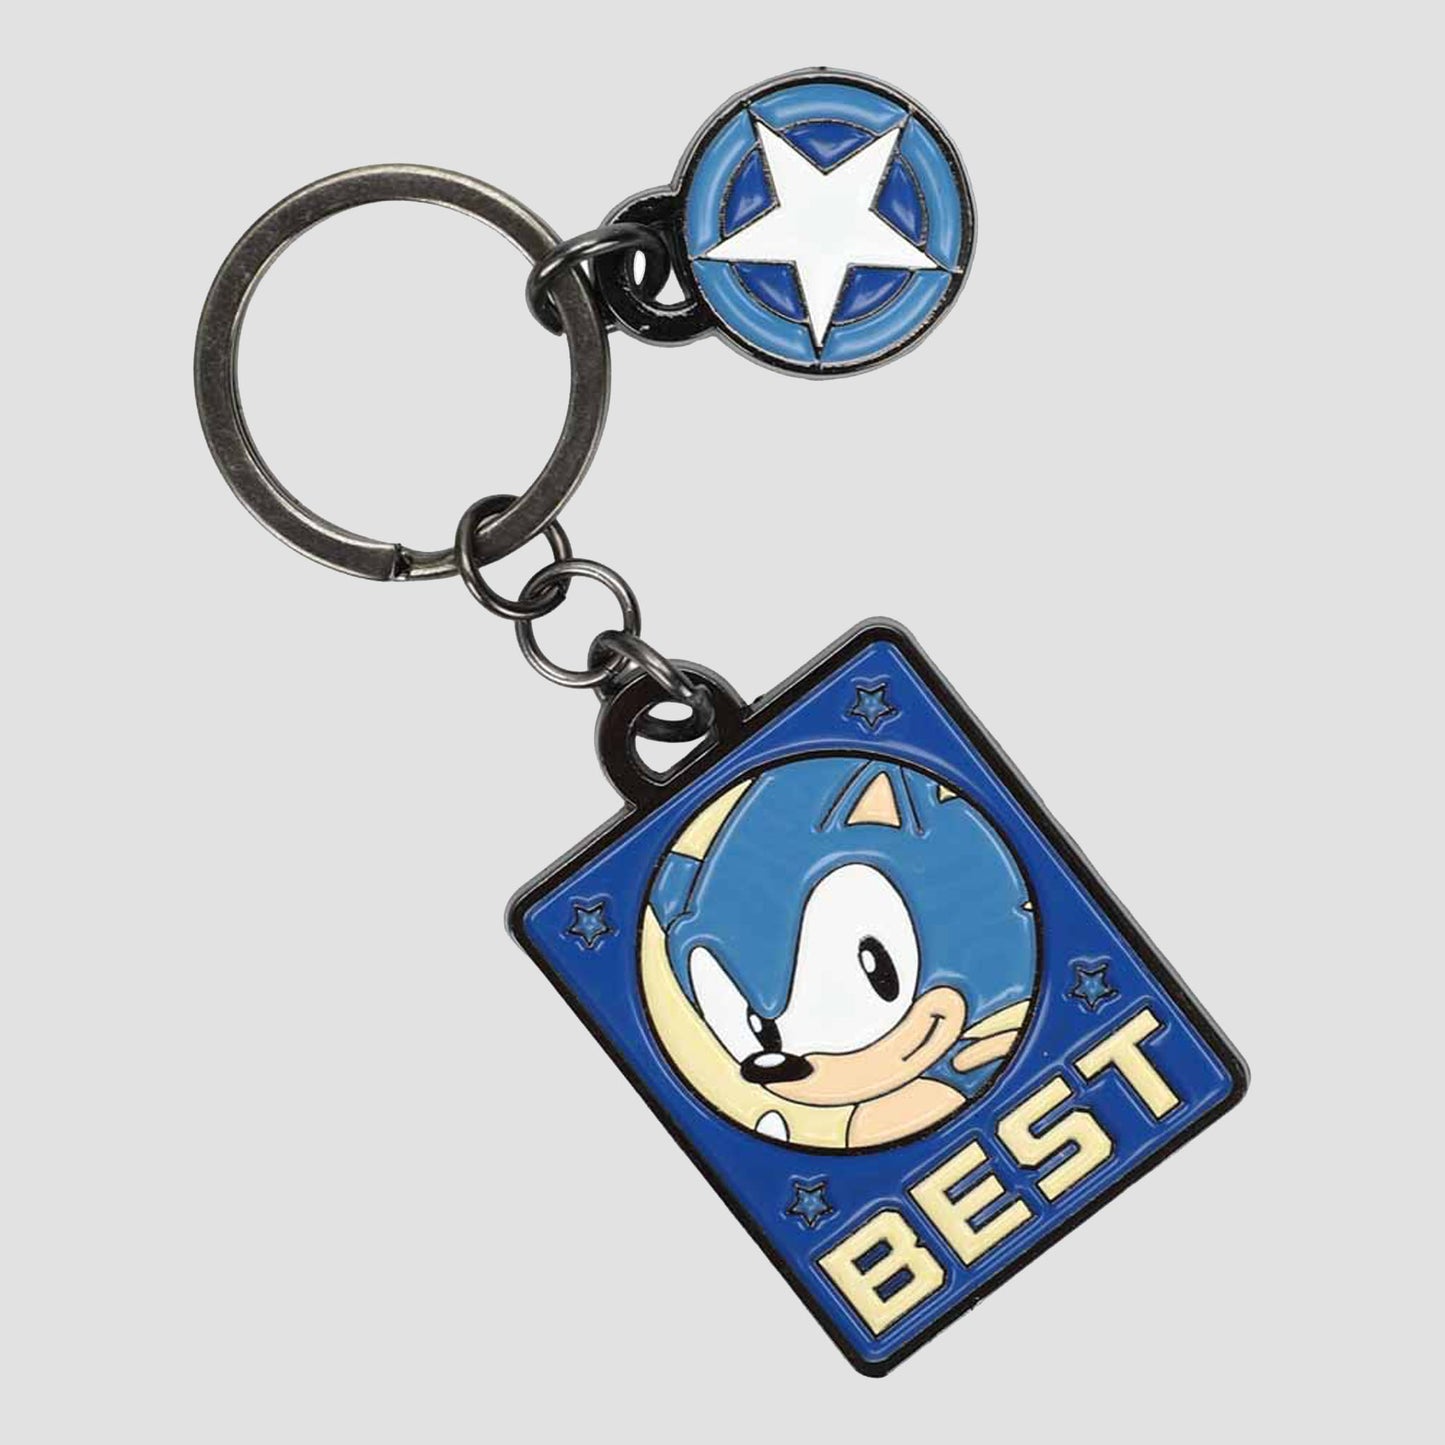 Sonic and Tails (Sonic the Hedgehog) "Best Buds" Matching Keychain Set